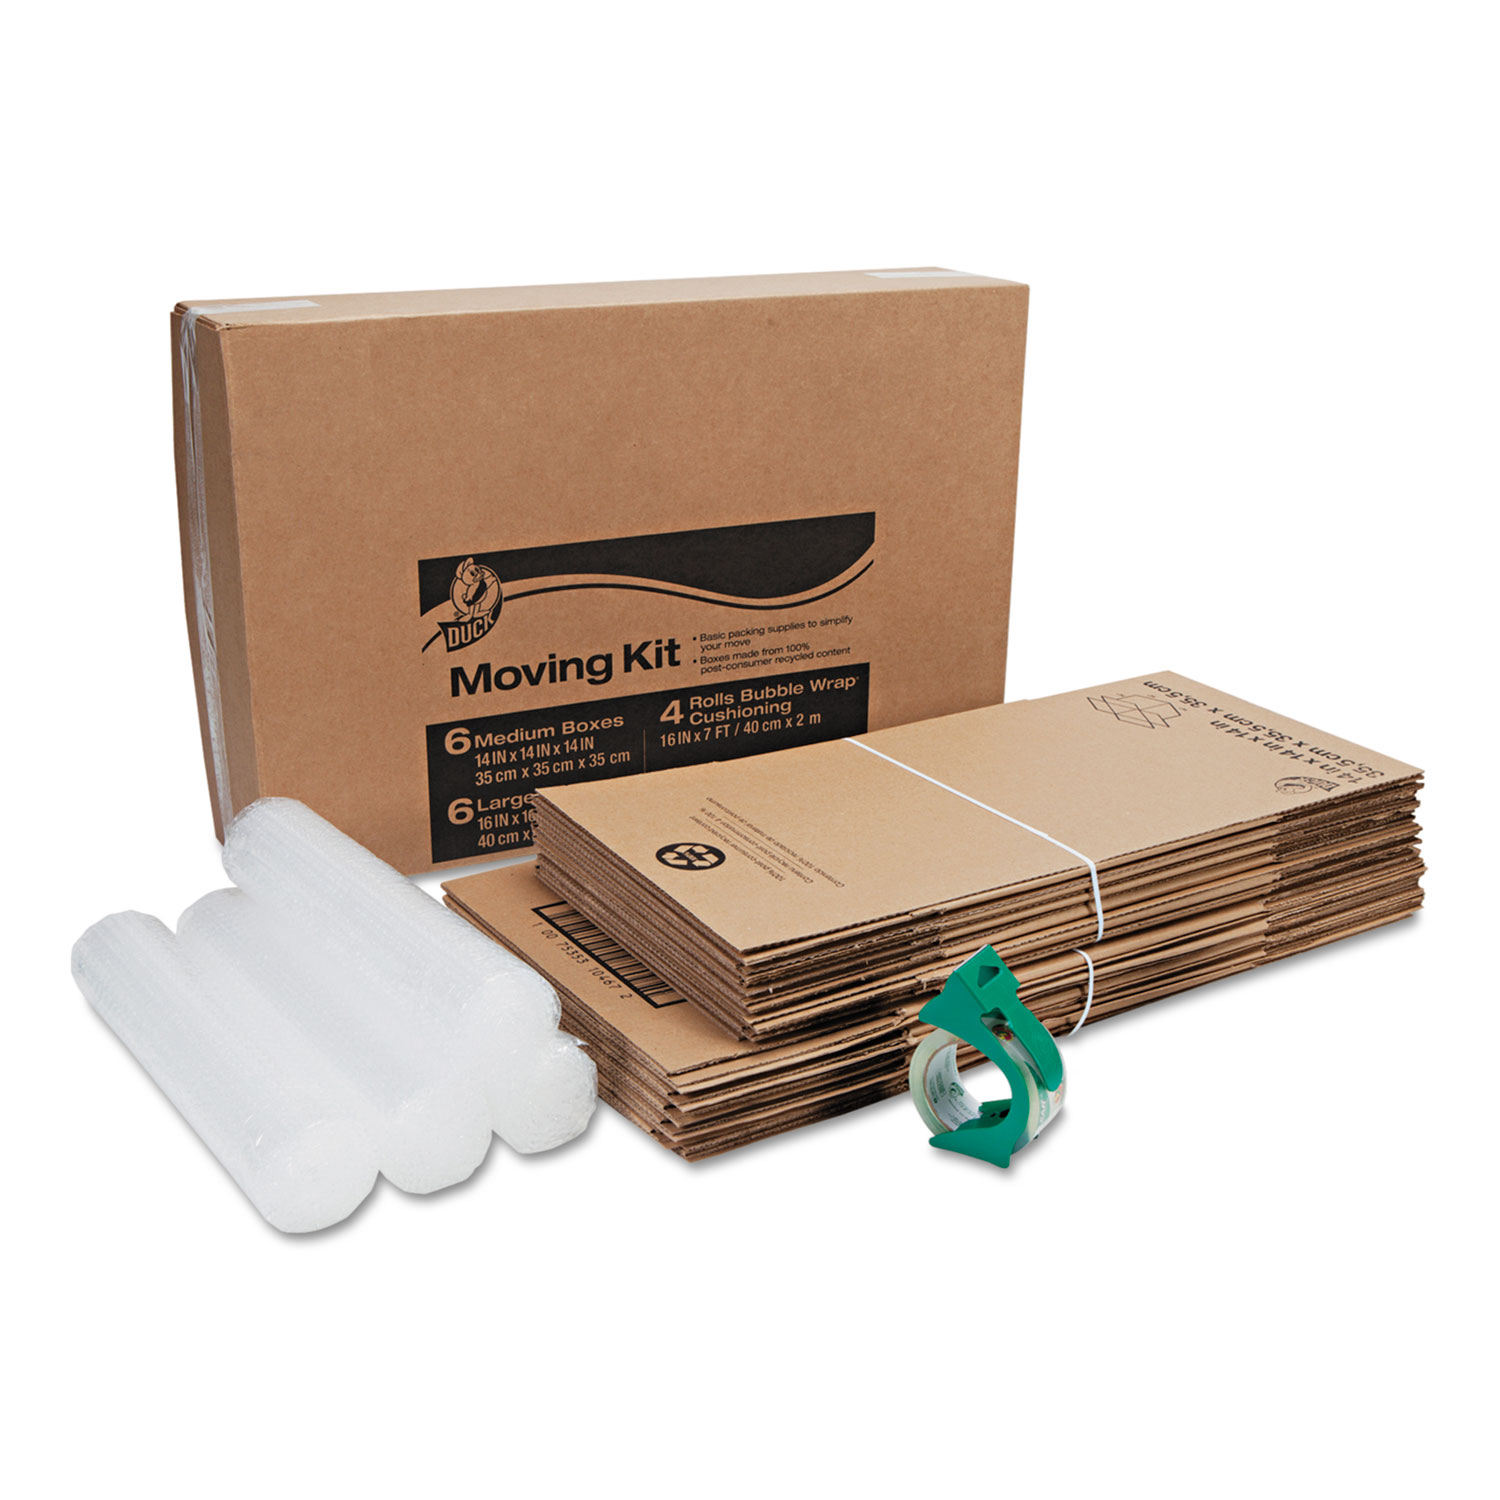  Duck 280640 Moving Kit, 6 Medium Boxes, 6 Large Boxes, 4 Rolls of Bubble Wrap, 1 Roll HD Clear Packing Tape (DUC280640) 